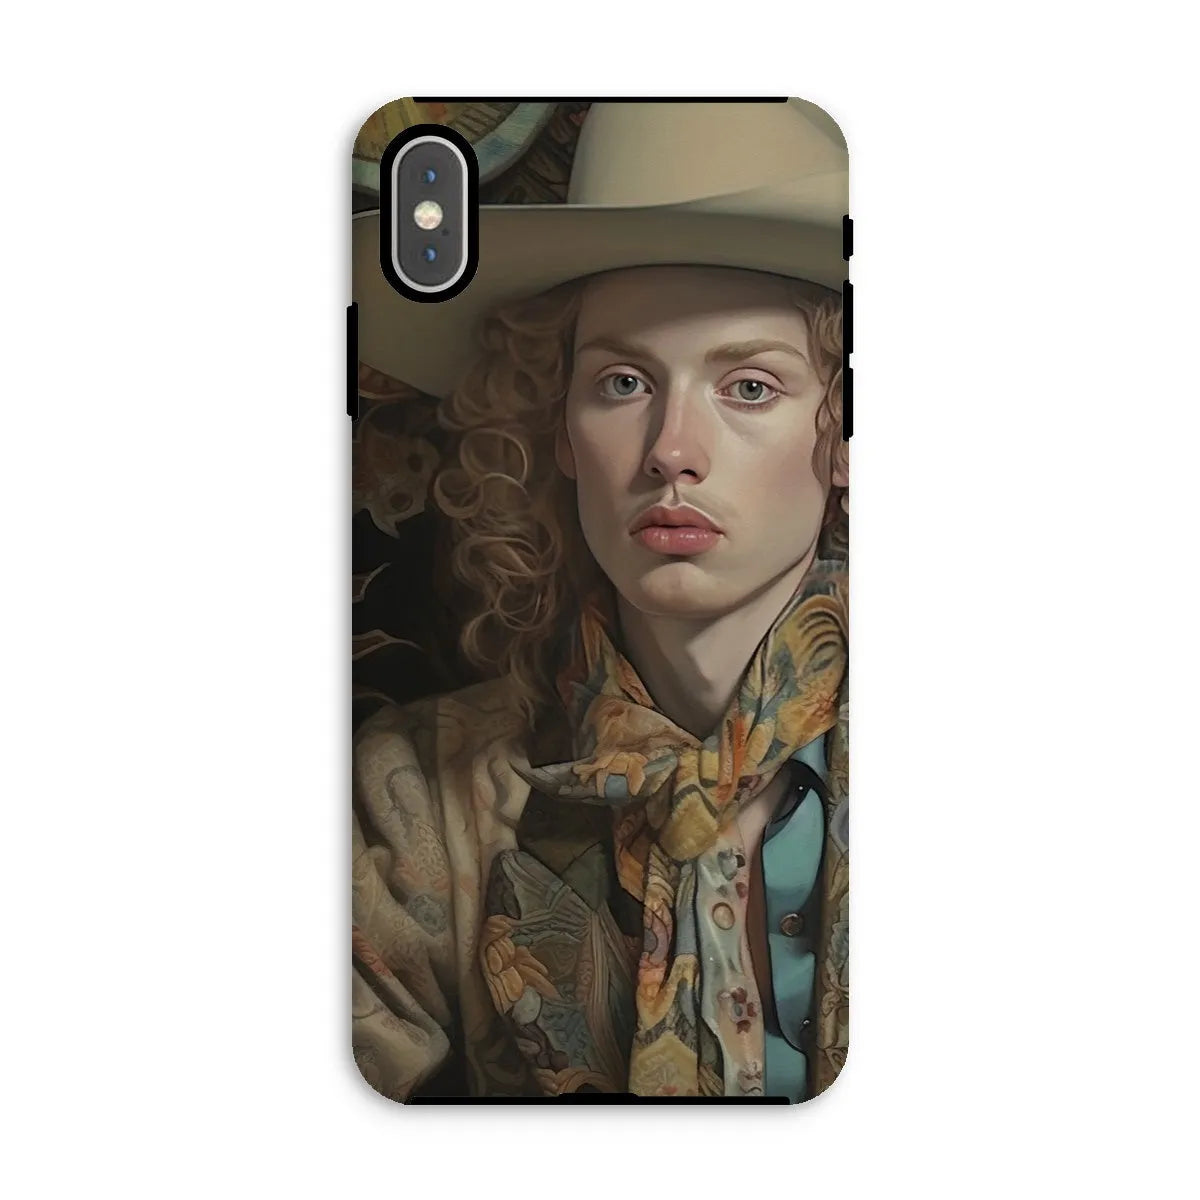 Ollie The Transgender Cowboy - F2m Dandy Outlaw Phone Case - Iphone Xs Max / Matte - Mobile Phone Cases - Aesthetic Art